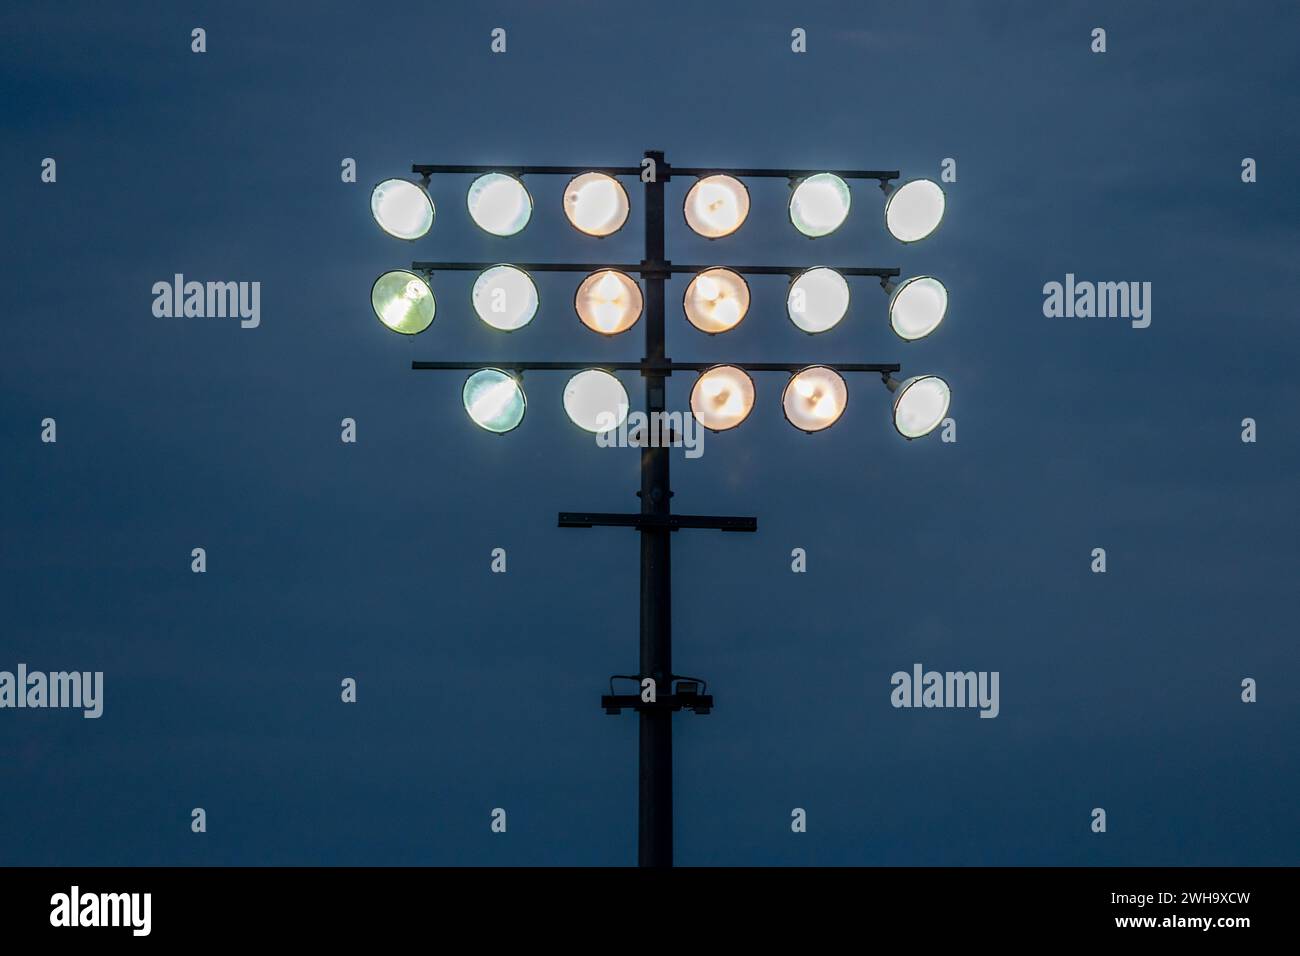 Abstract view of illuminated outdoor stadium lights against a darkened sky at dusk Stock Photo